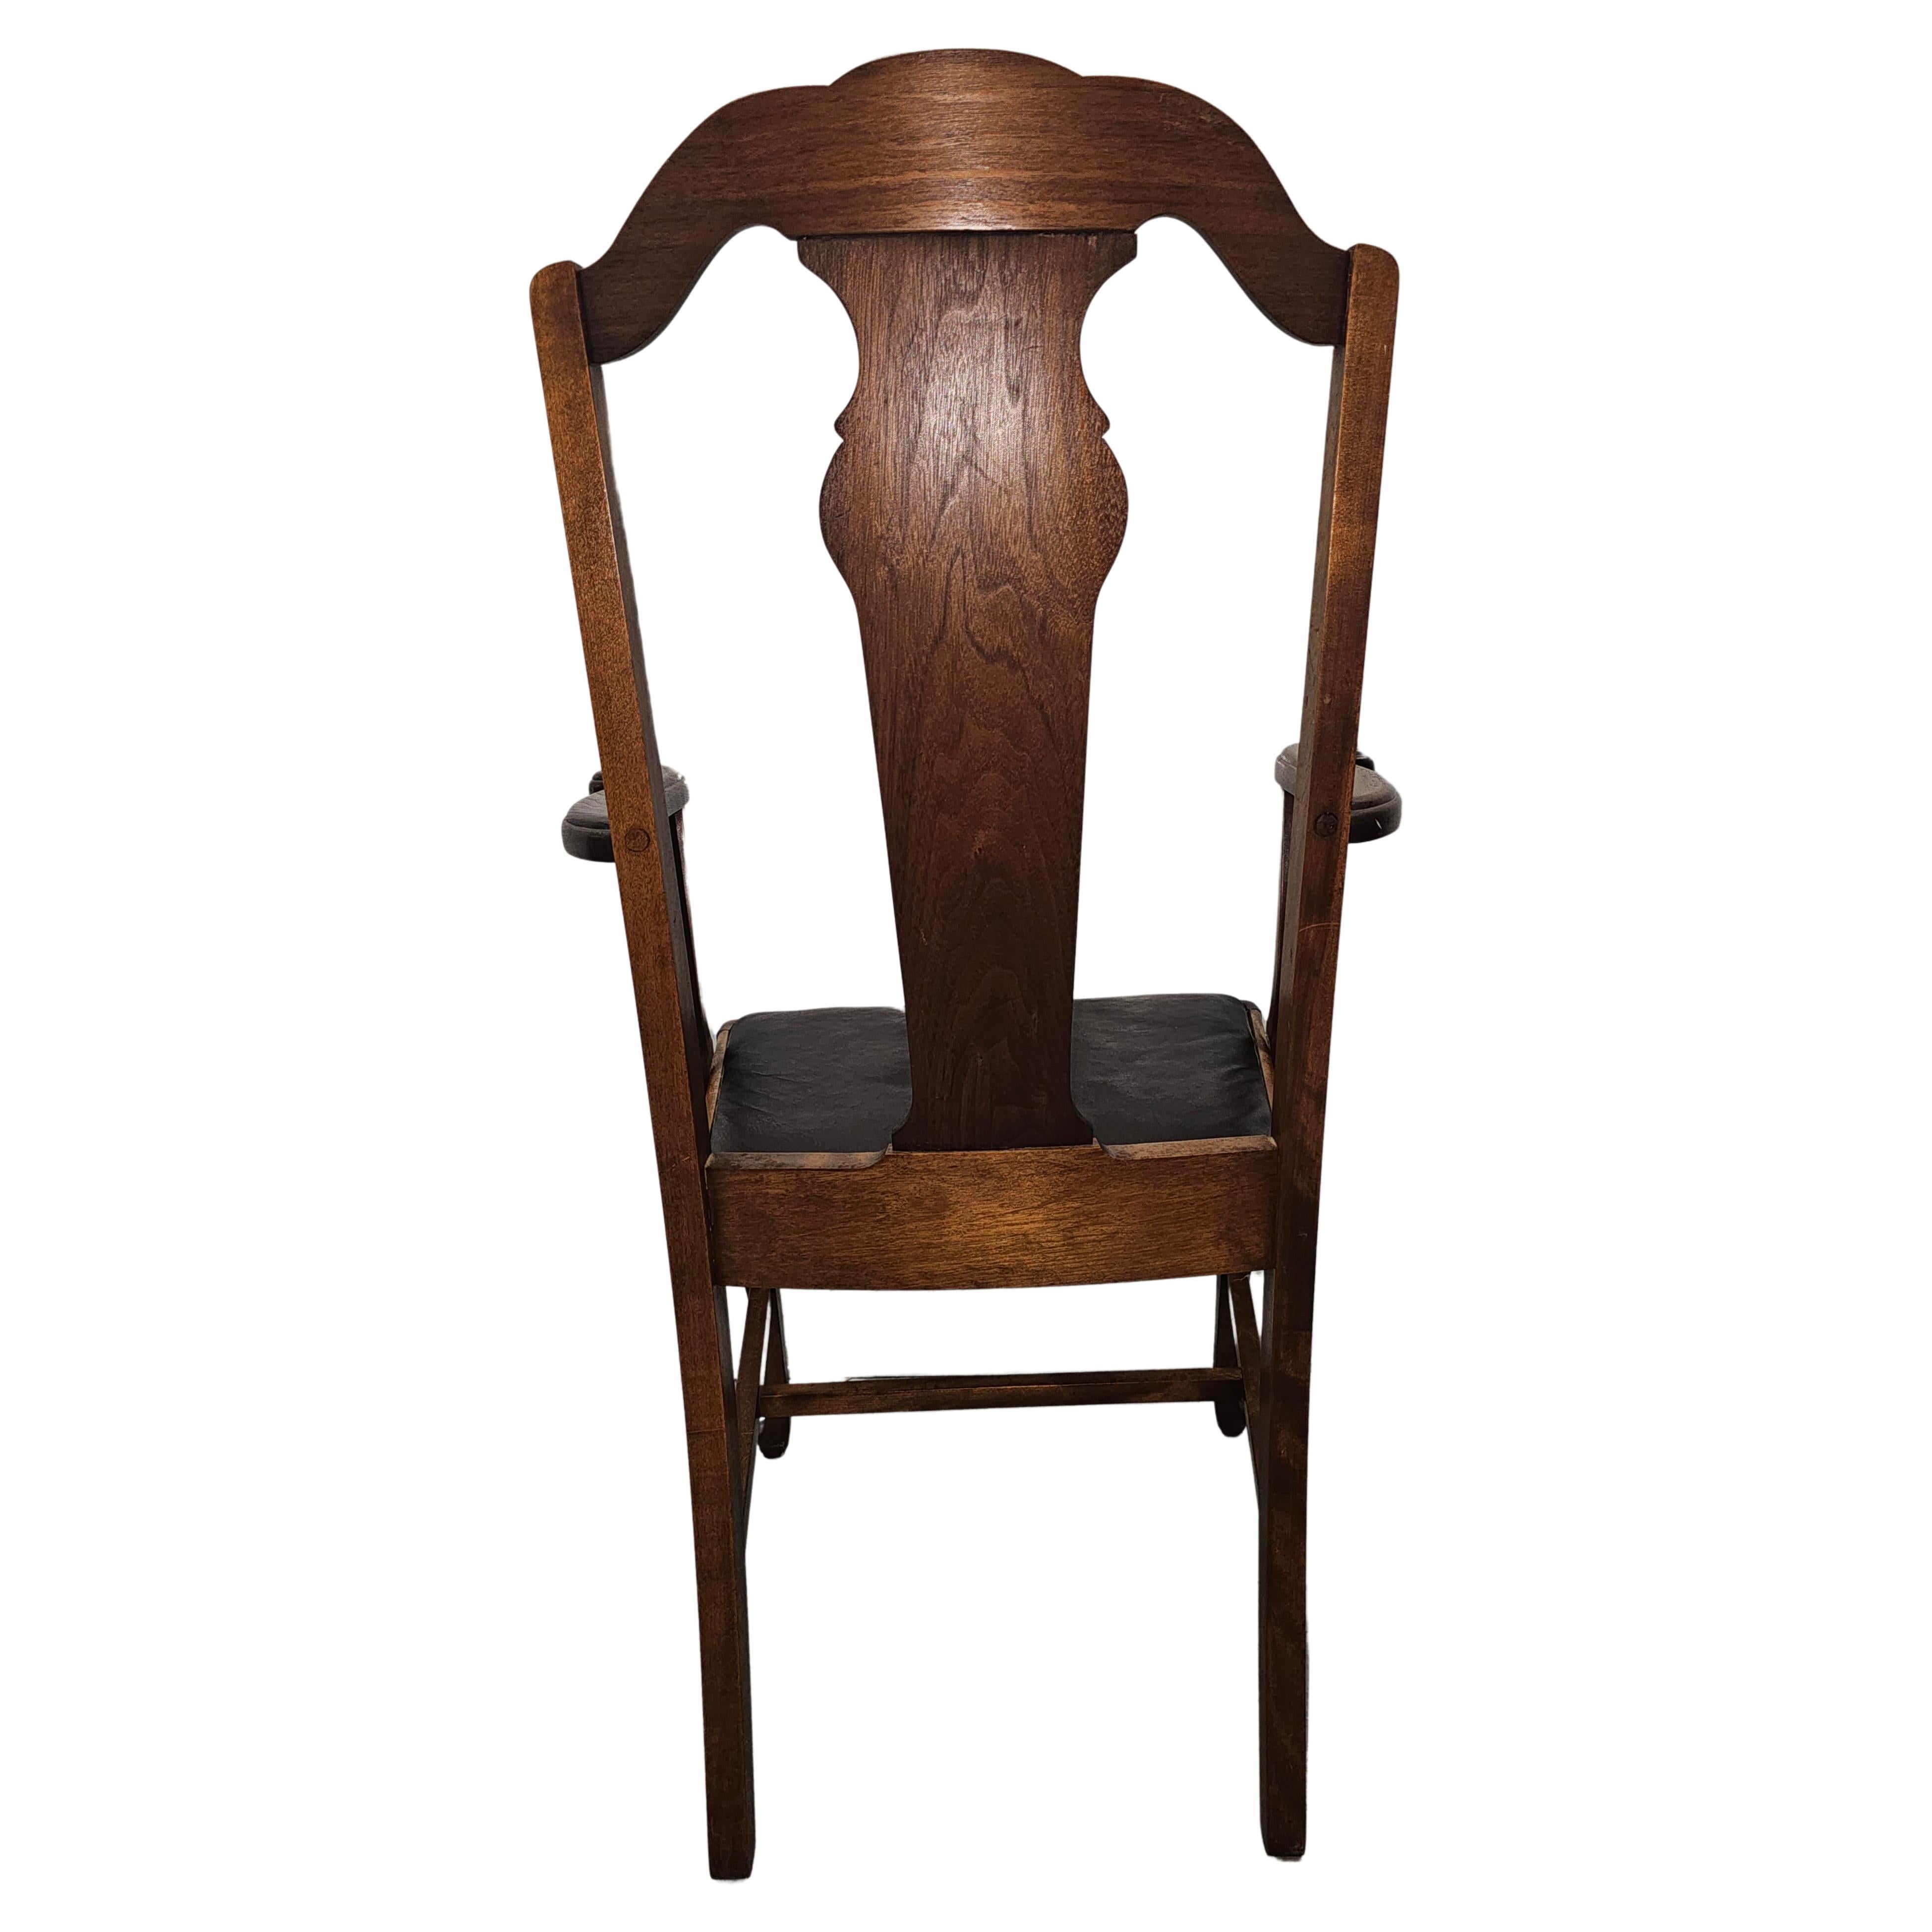 Stained 1916 Sikes Furniture Walnut & Leather Upholstered Seat Armchair For Sale